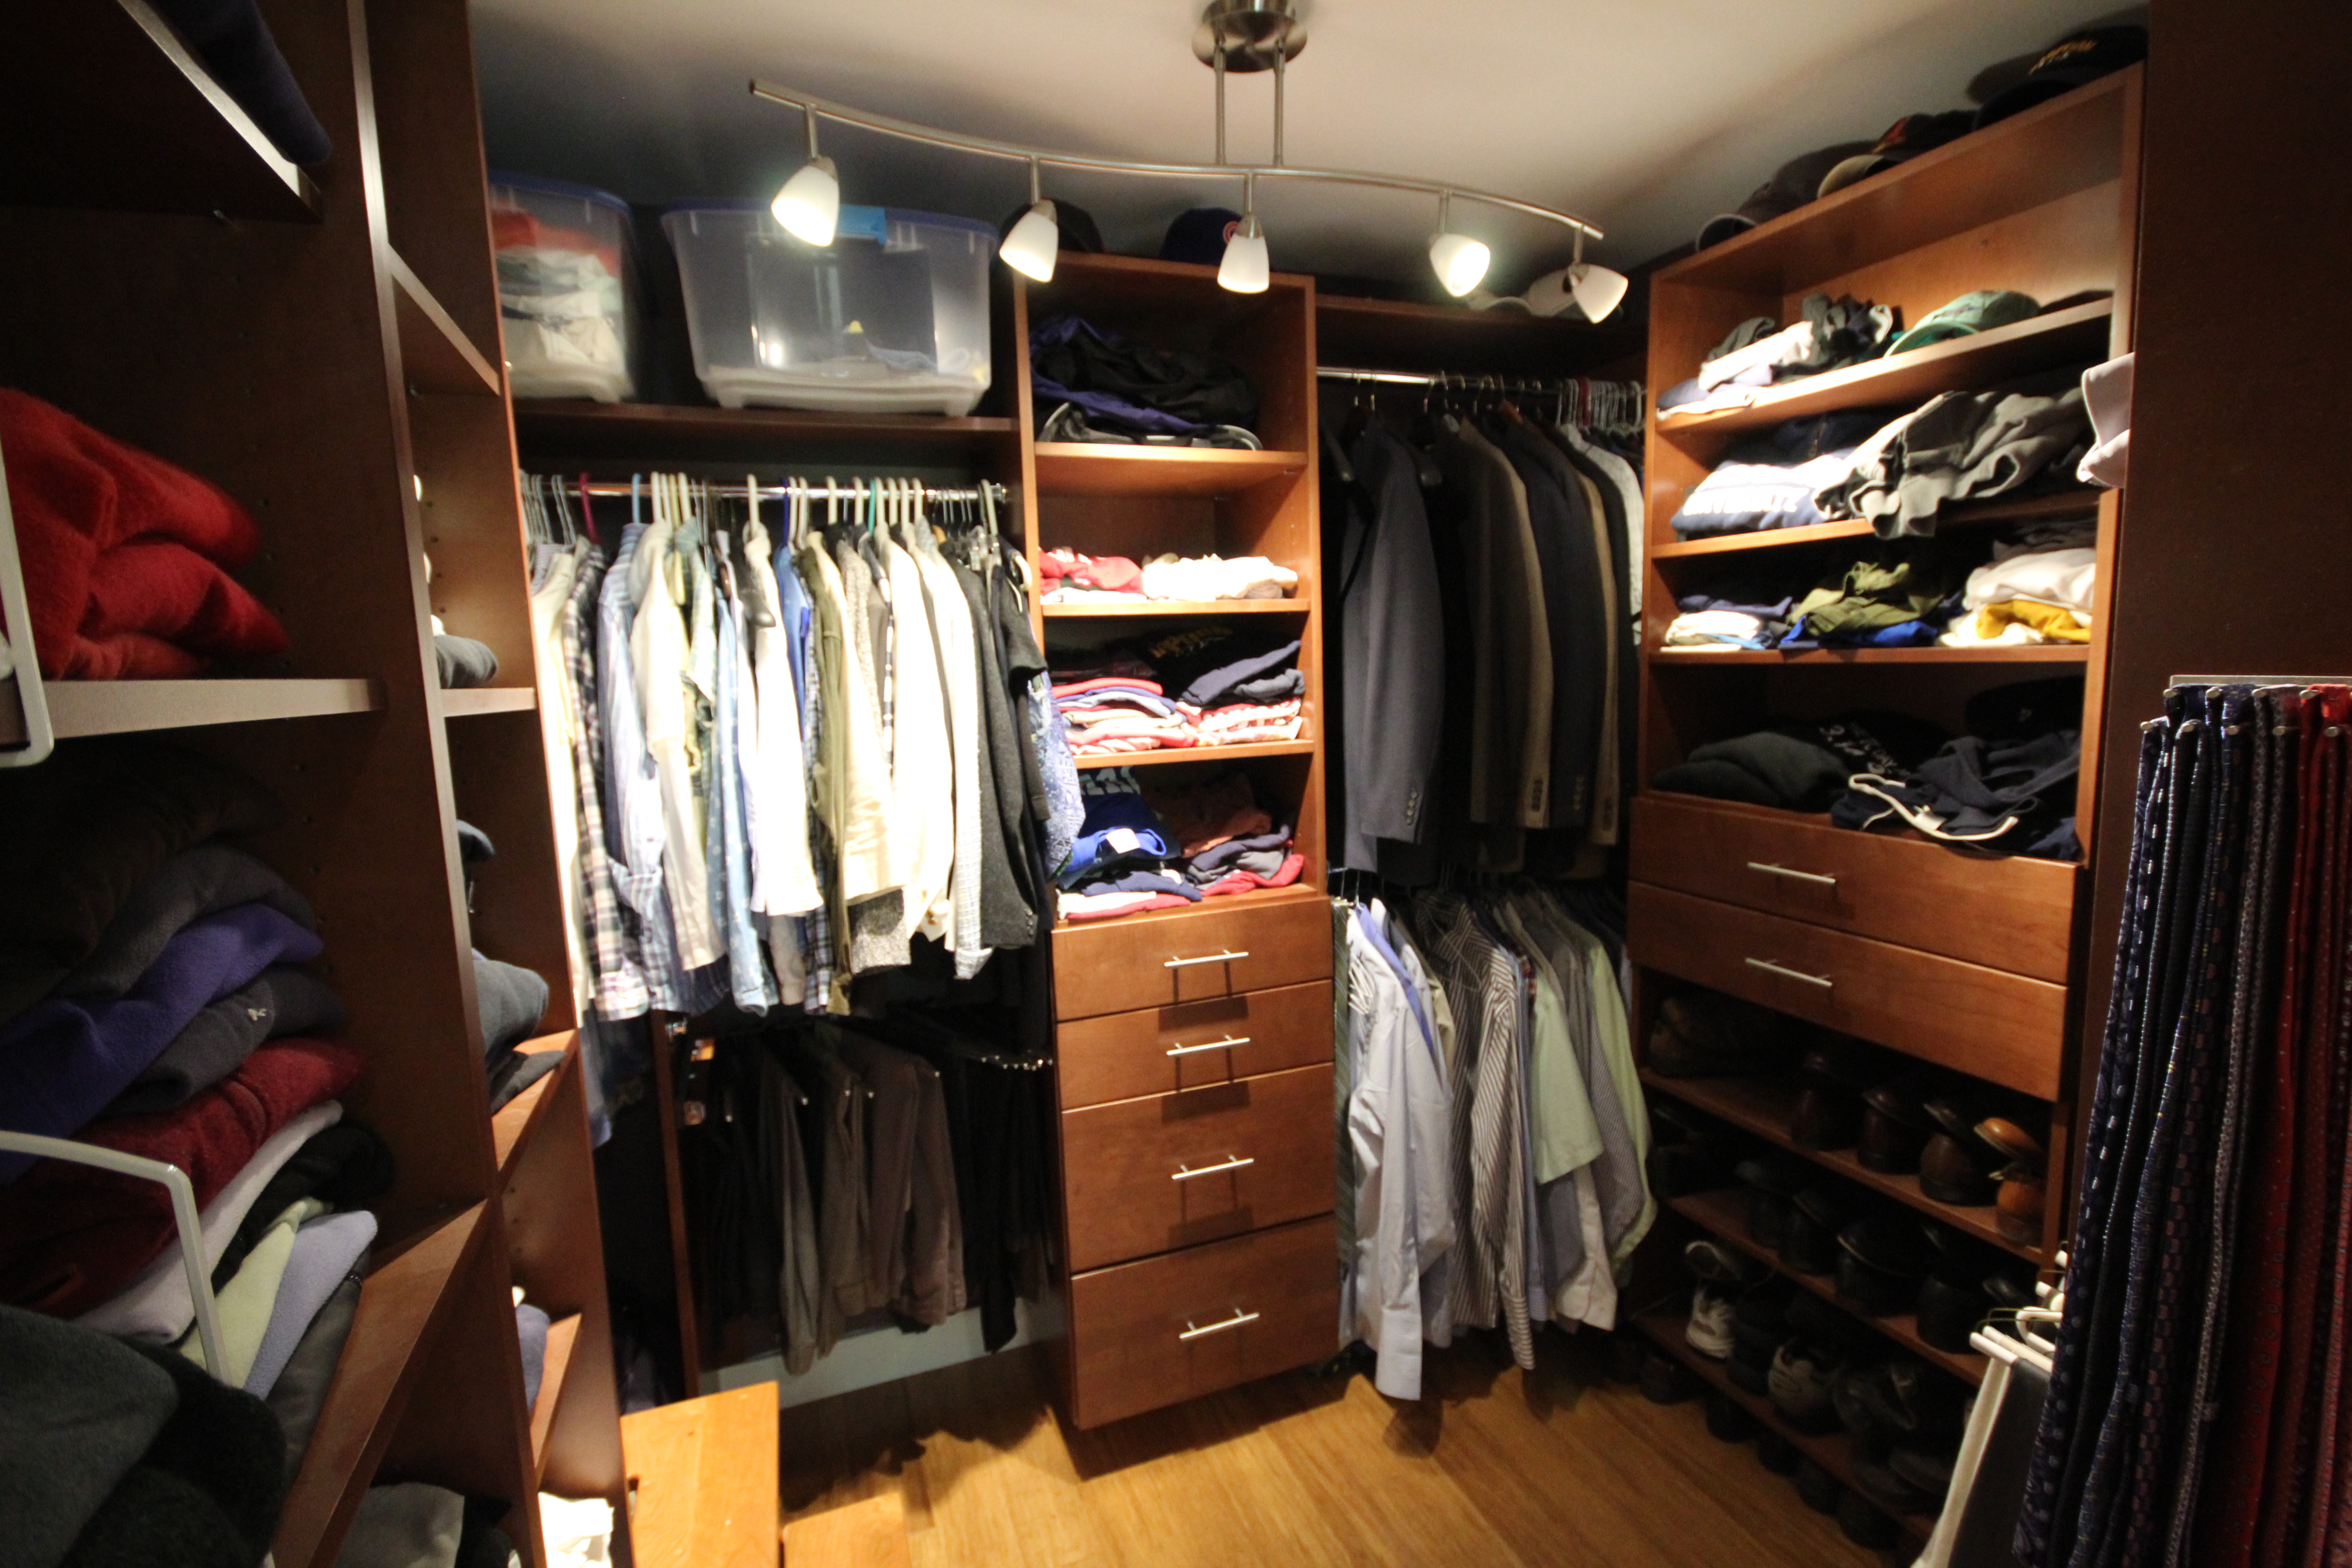 AFTER: A CLOSET ORGANIZED FOR HIM AND HER